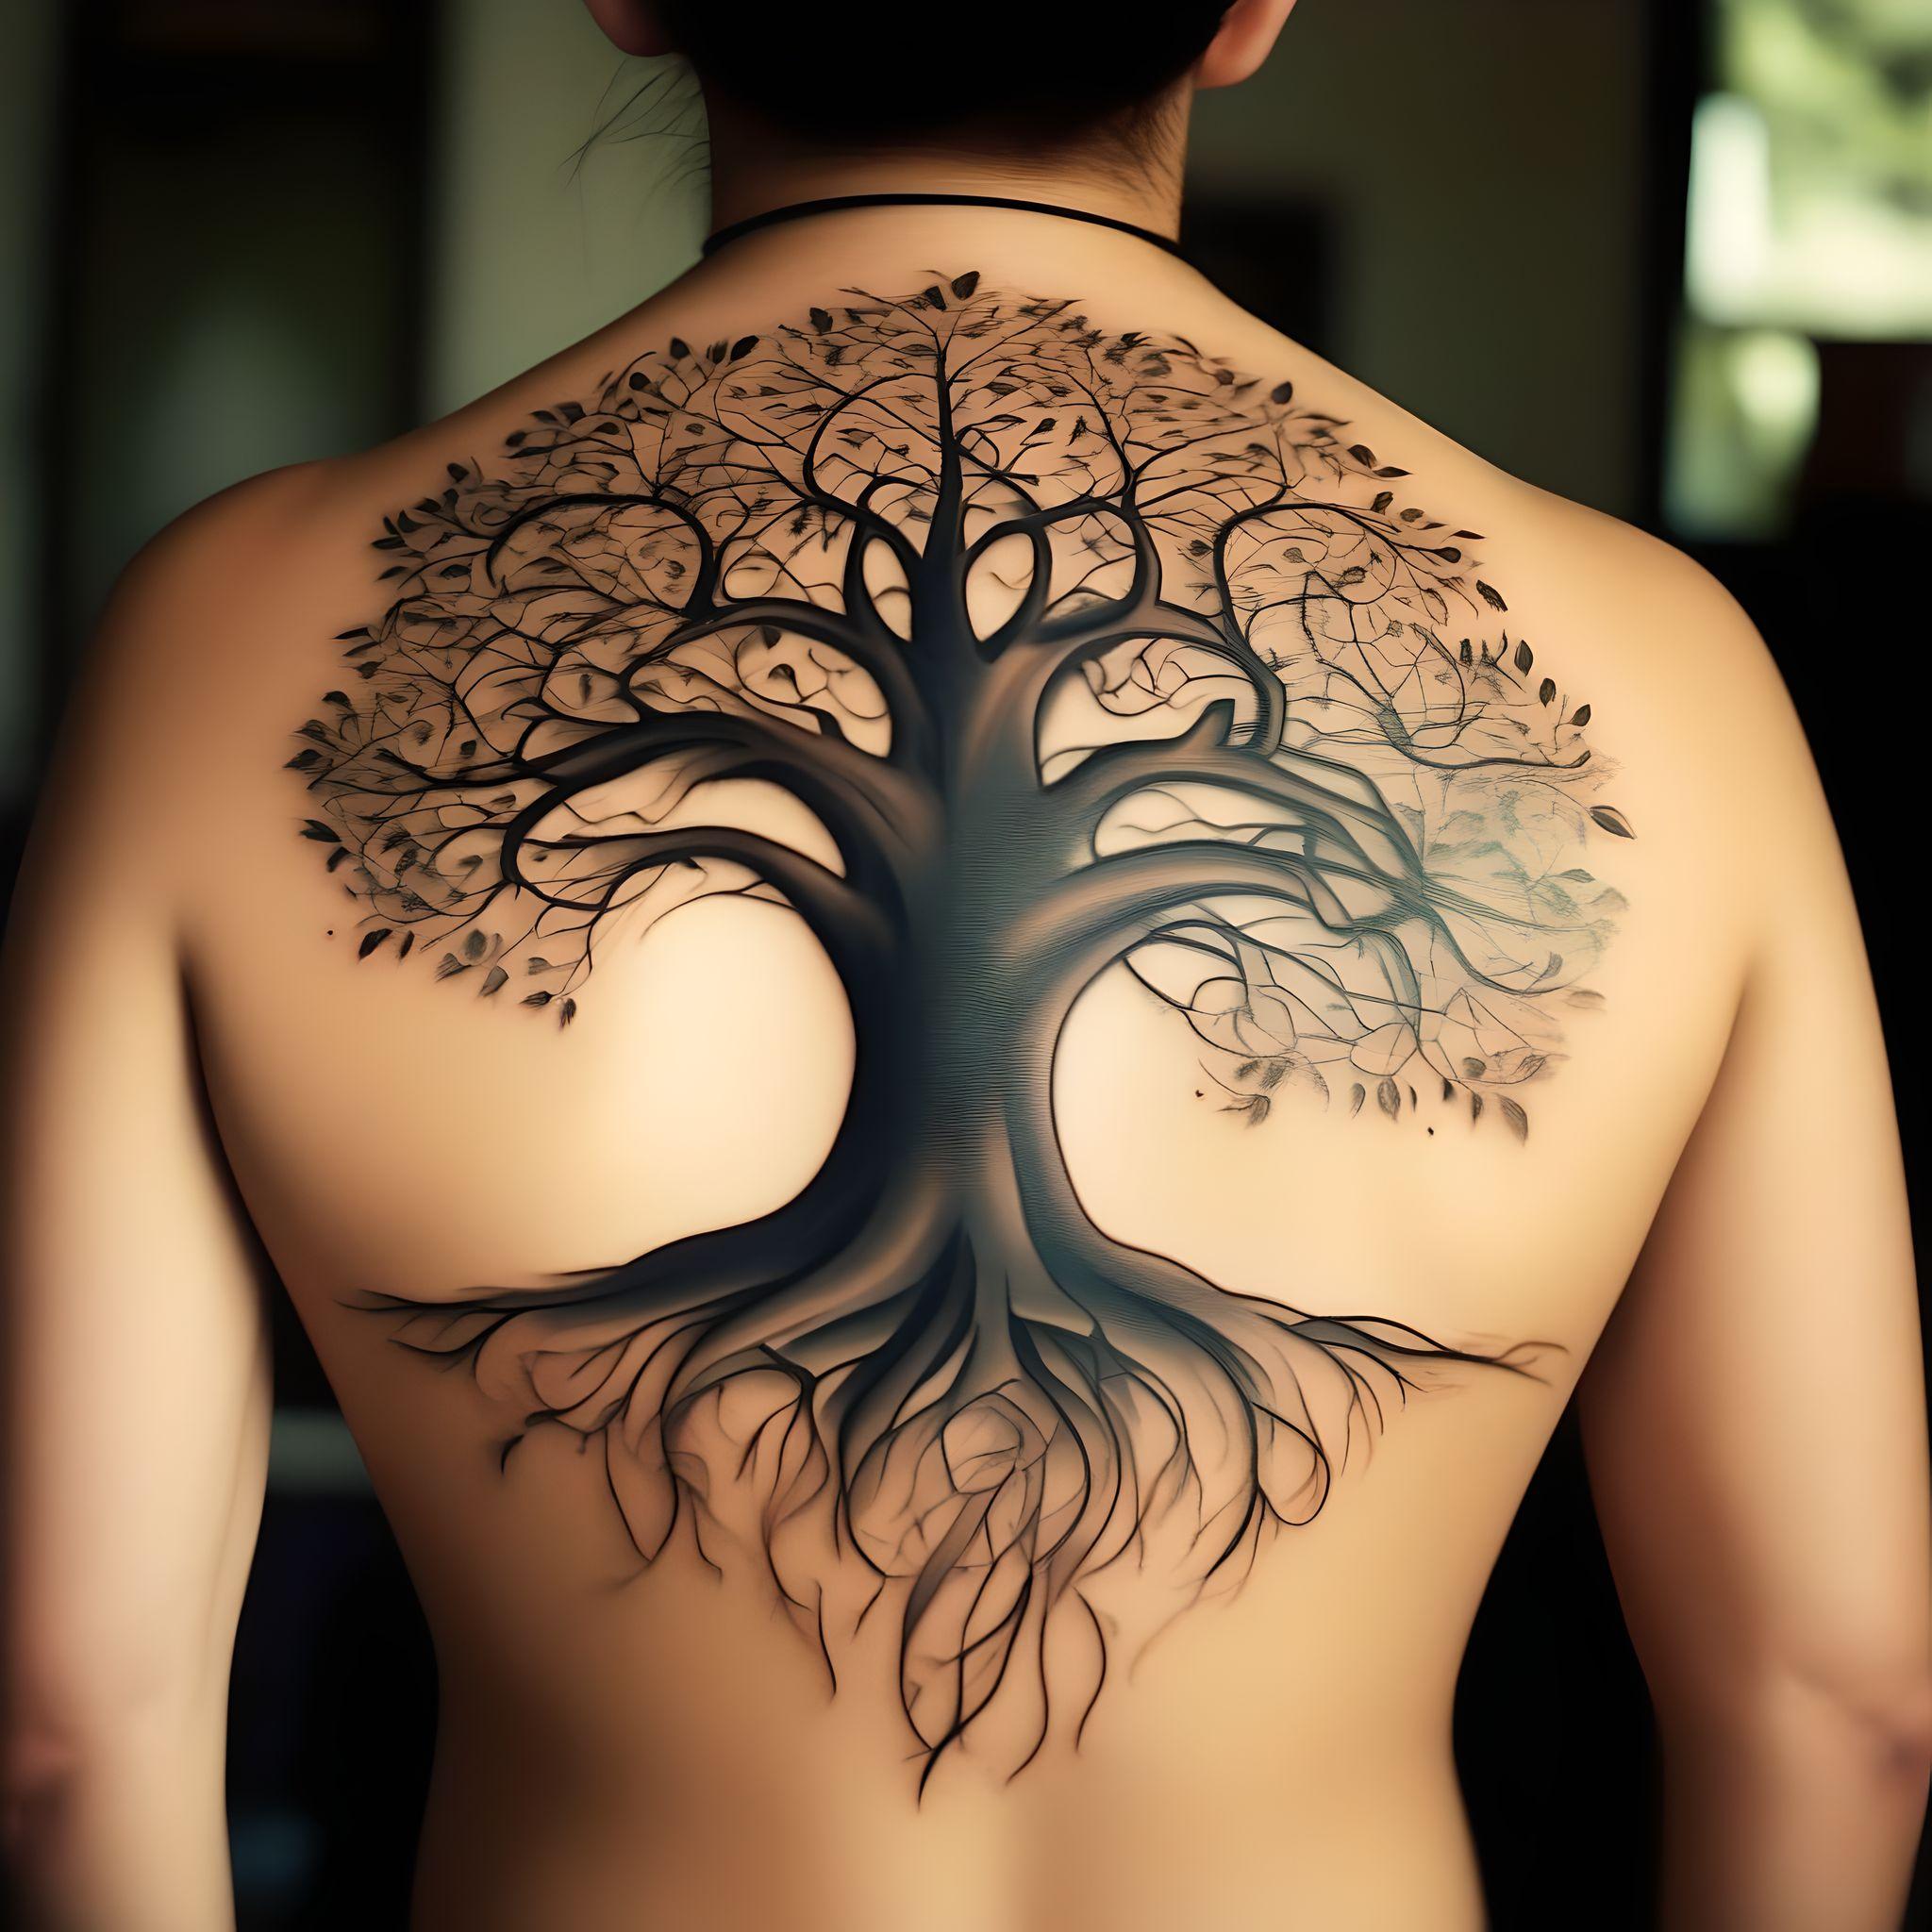 101 Best Family Tree Tattoo Ideas You Have To See To Believe!